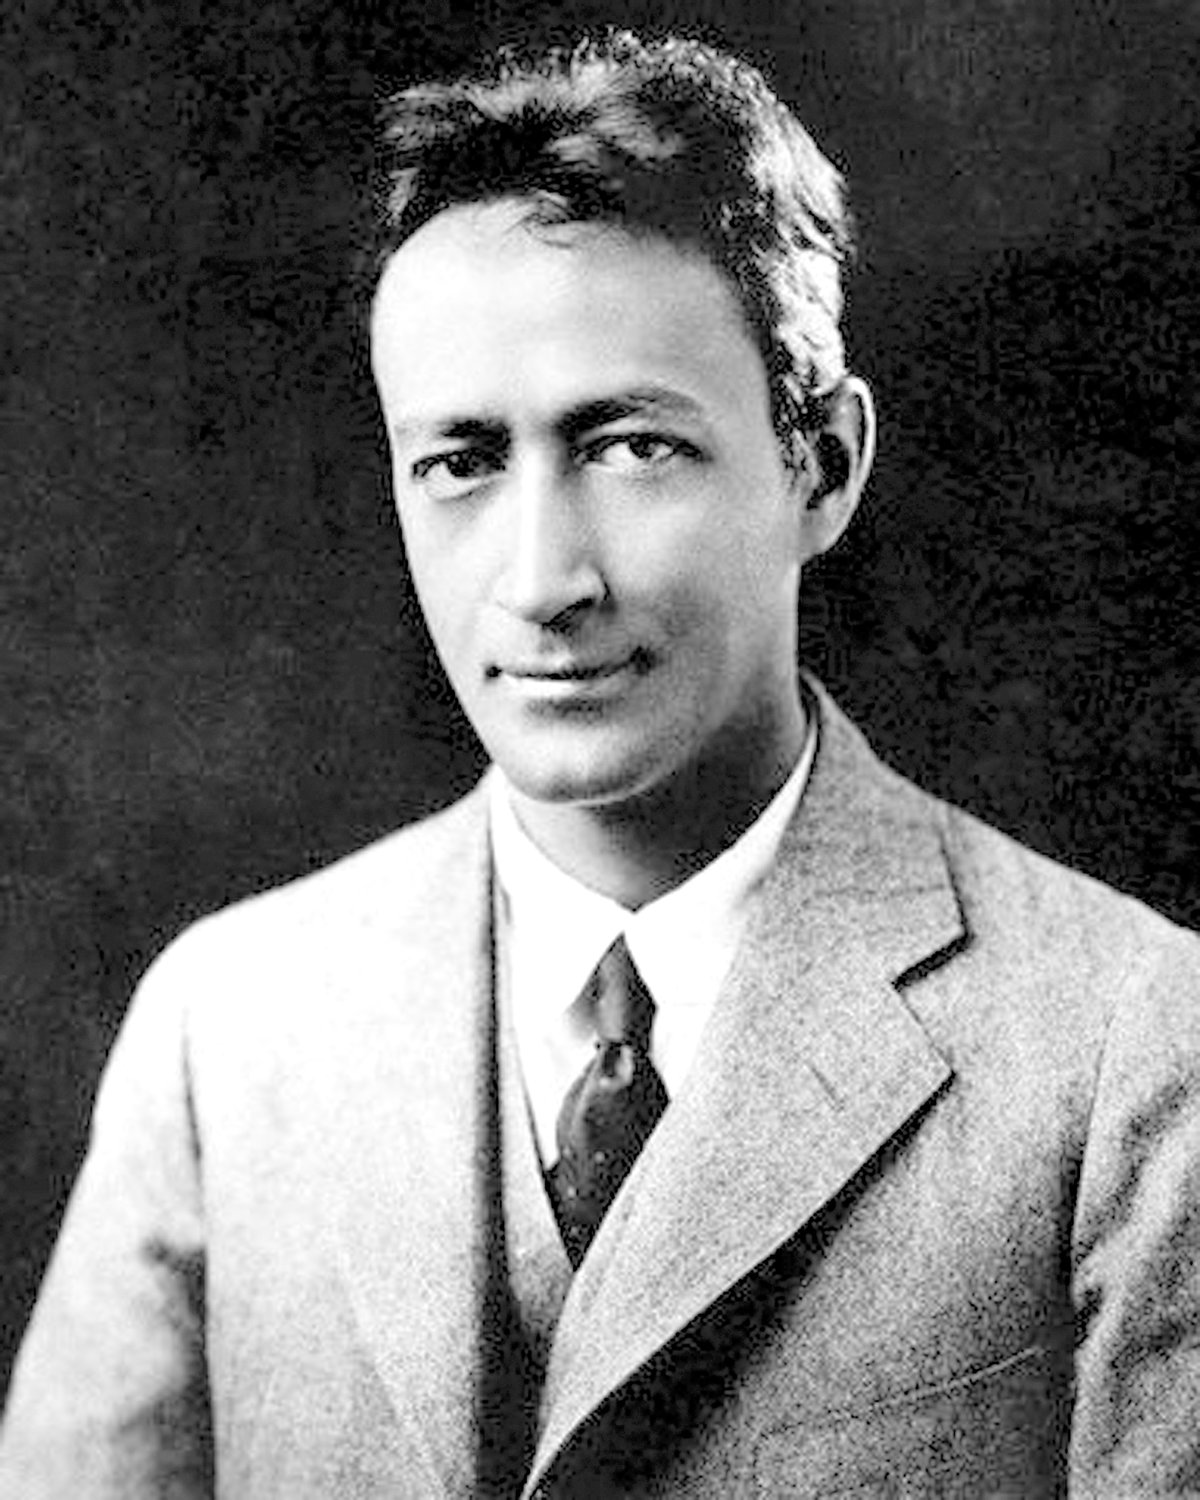 CONTRIBUTED PHOTO
N. Jean Toomer was an acclaimed poet and novelist, who lived part of his life in Doylestown.